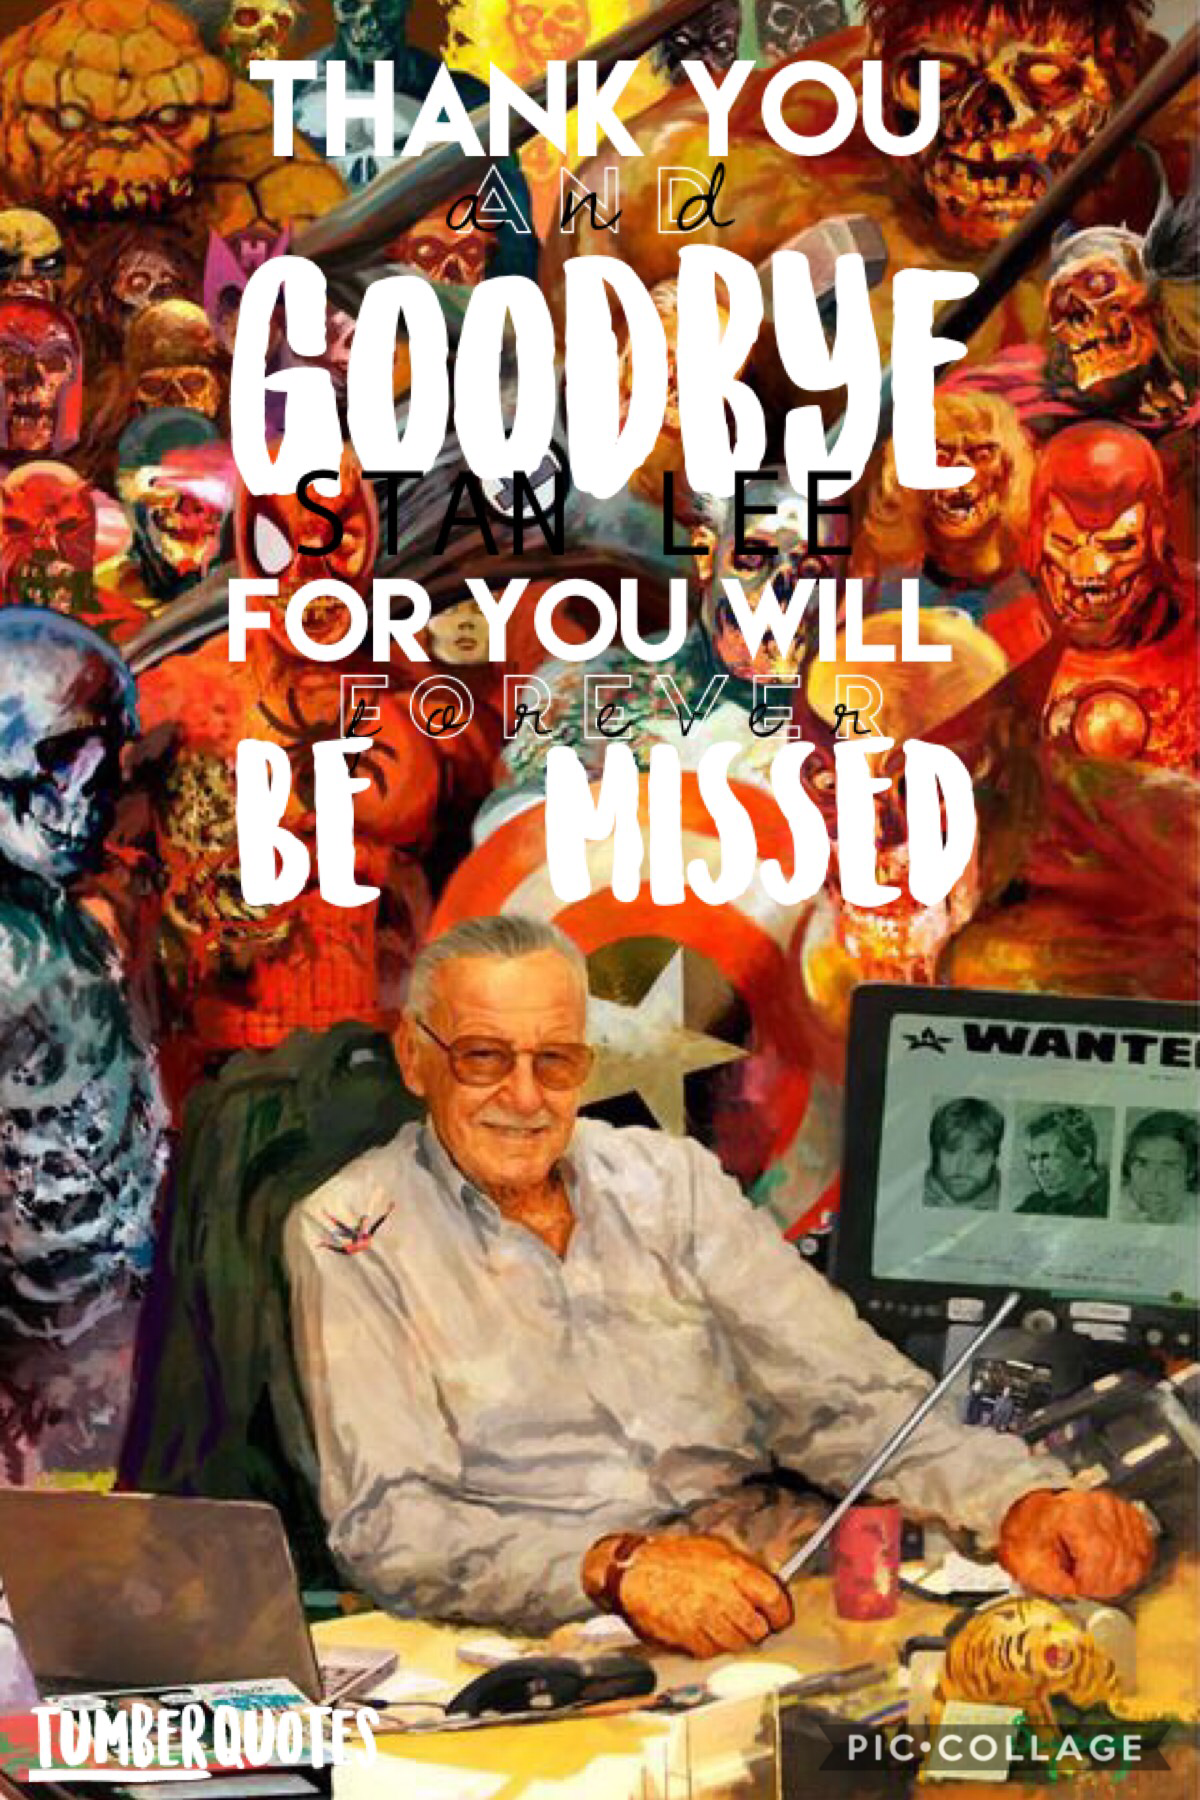 💔tap💔
In the loving memories of Stan Lee. 
Born in 1922 and died in 2018. At the age of 95. 
Father of Marvel. 
Creator of the MCU. 
Superhero of Marvel Comics.
Died before the last Avengers movie.
May Your Legacy Last Forever. 
Thank you and goodbye Stan